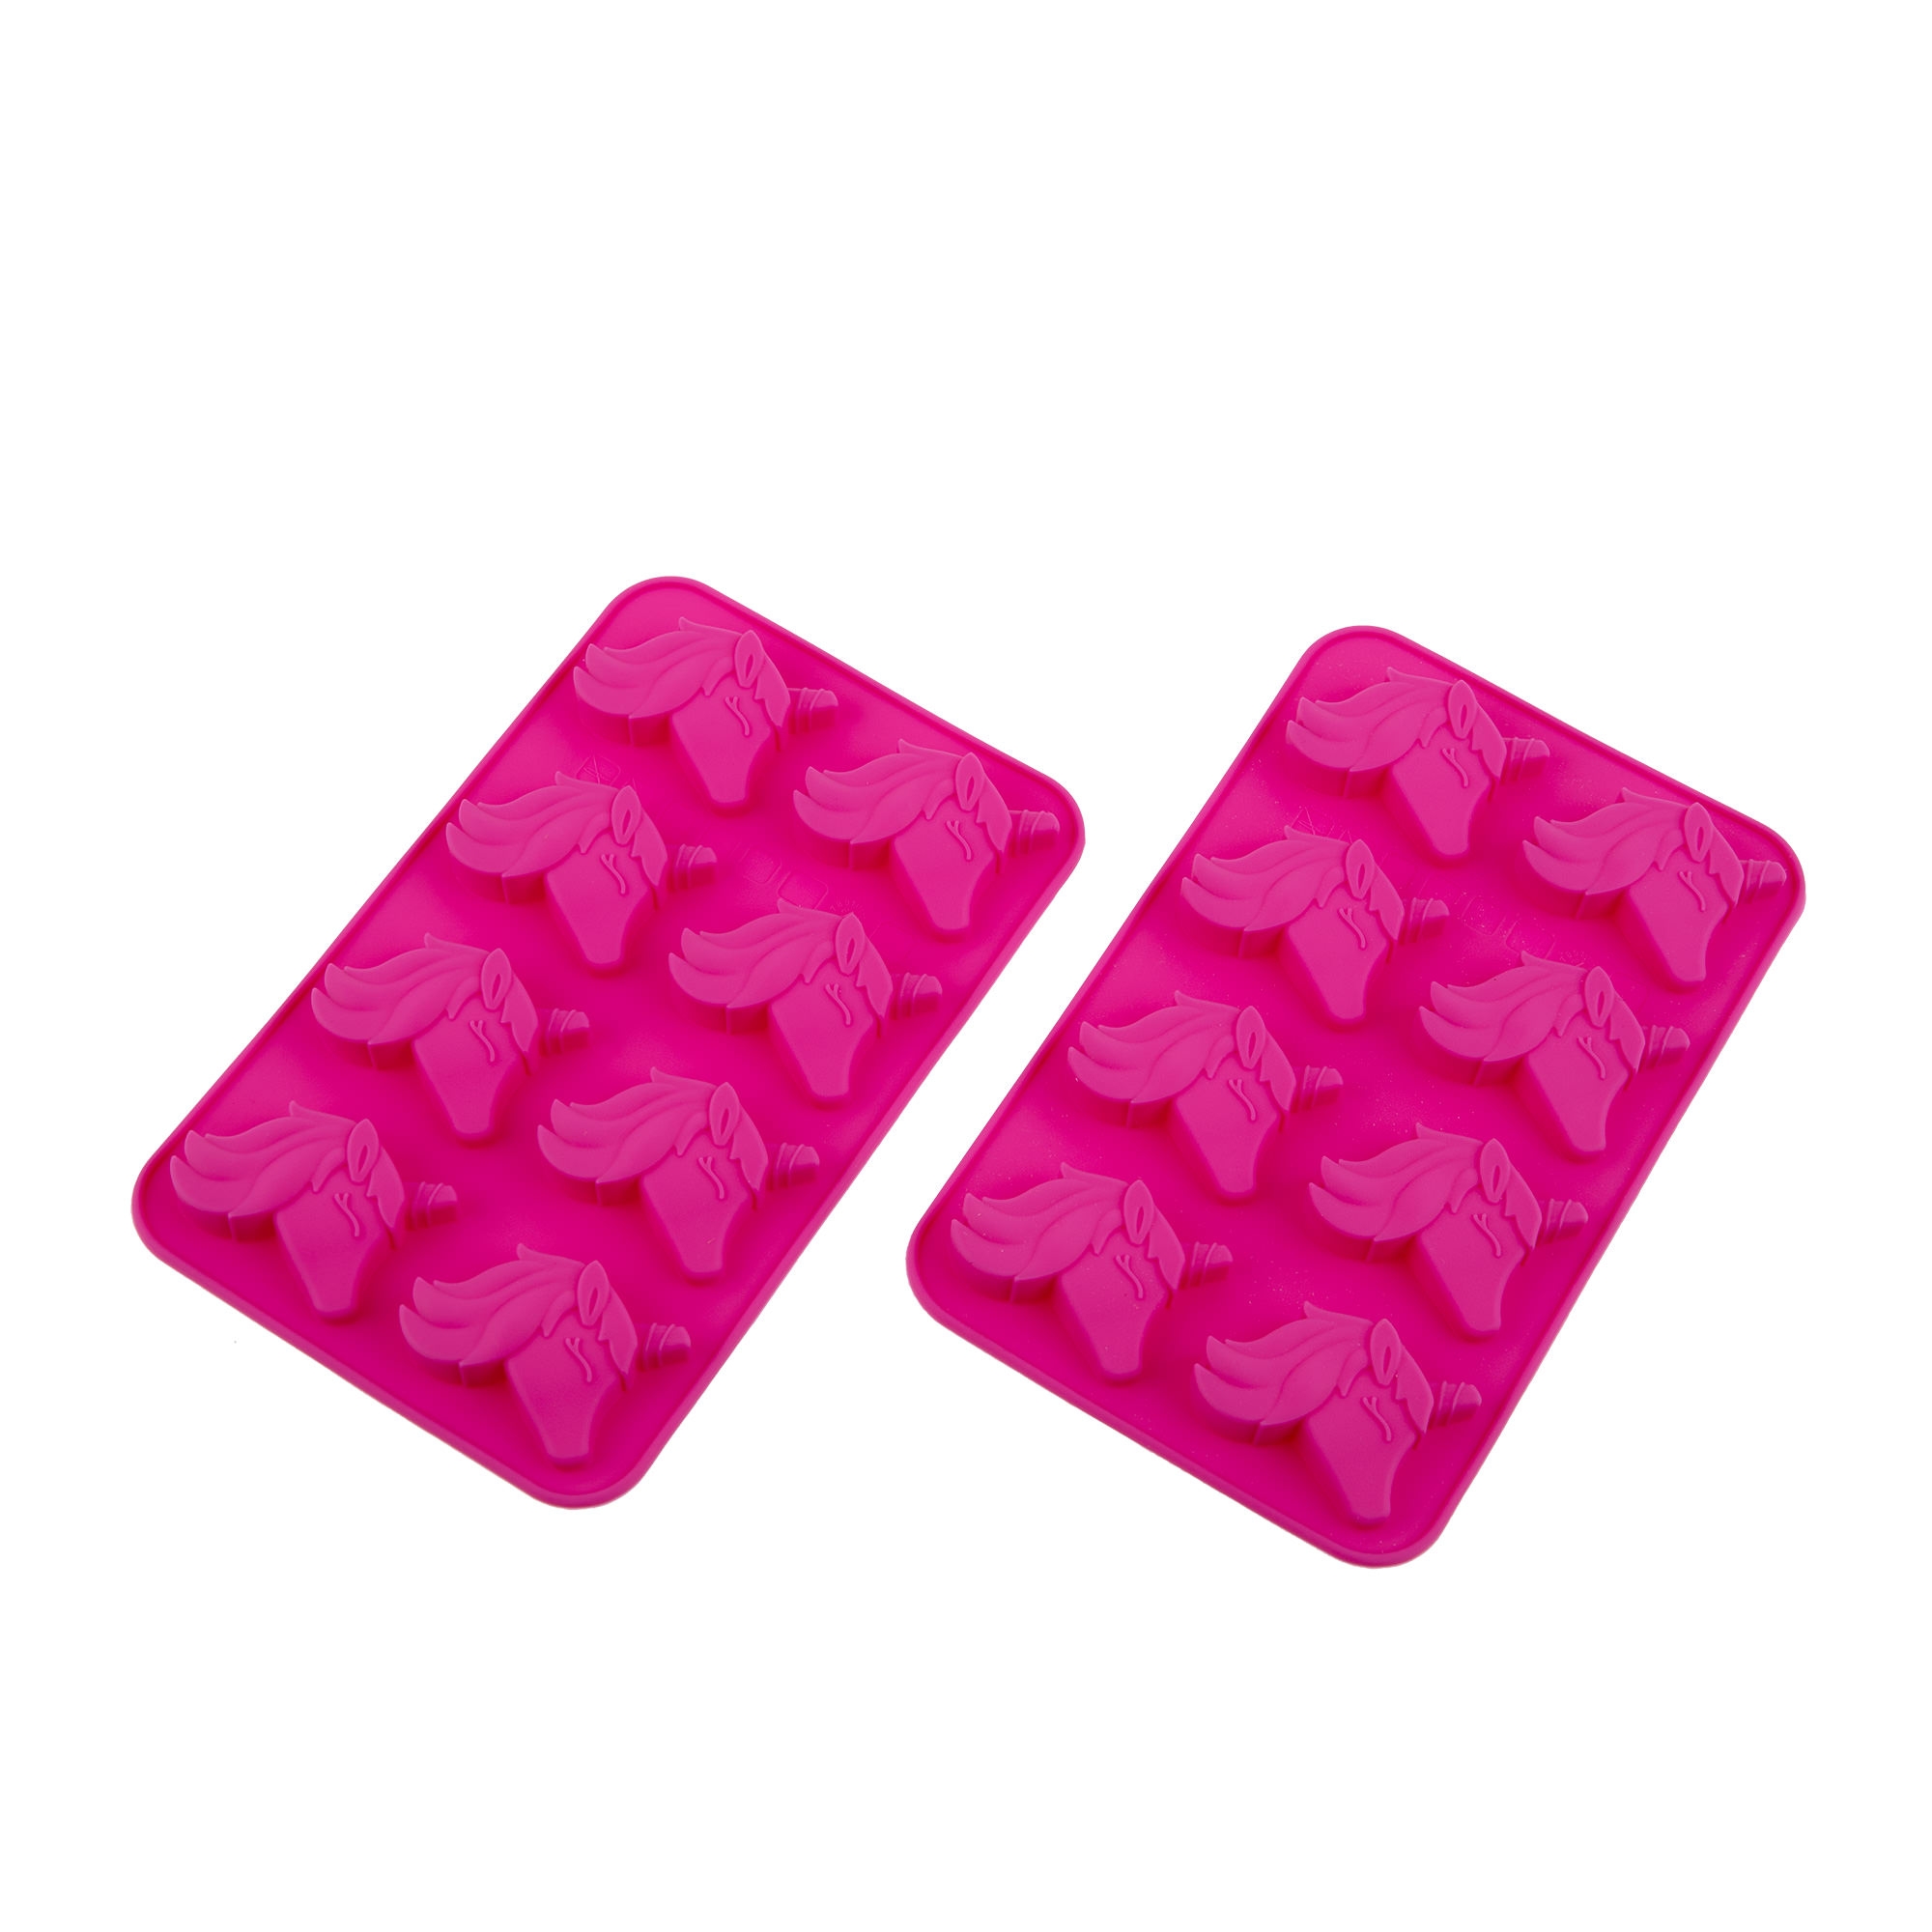 Daily Bake Unicorn Chocolate Mould 8 Cup Set of 2 Pink Image 1